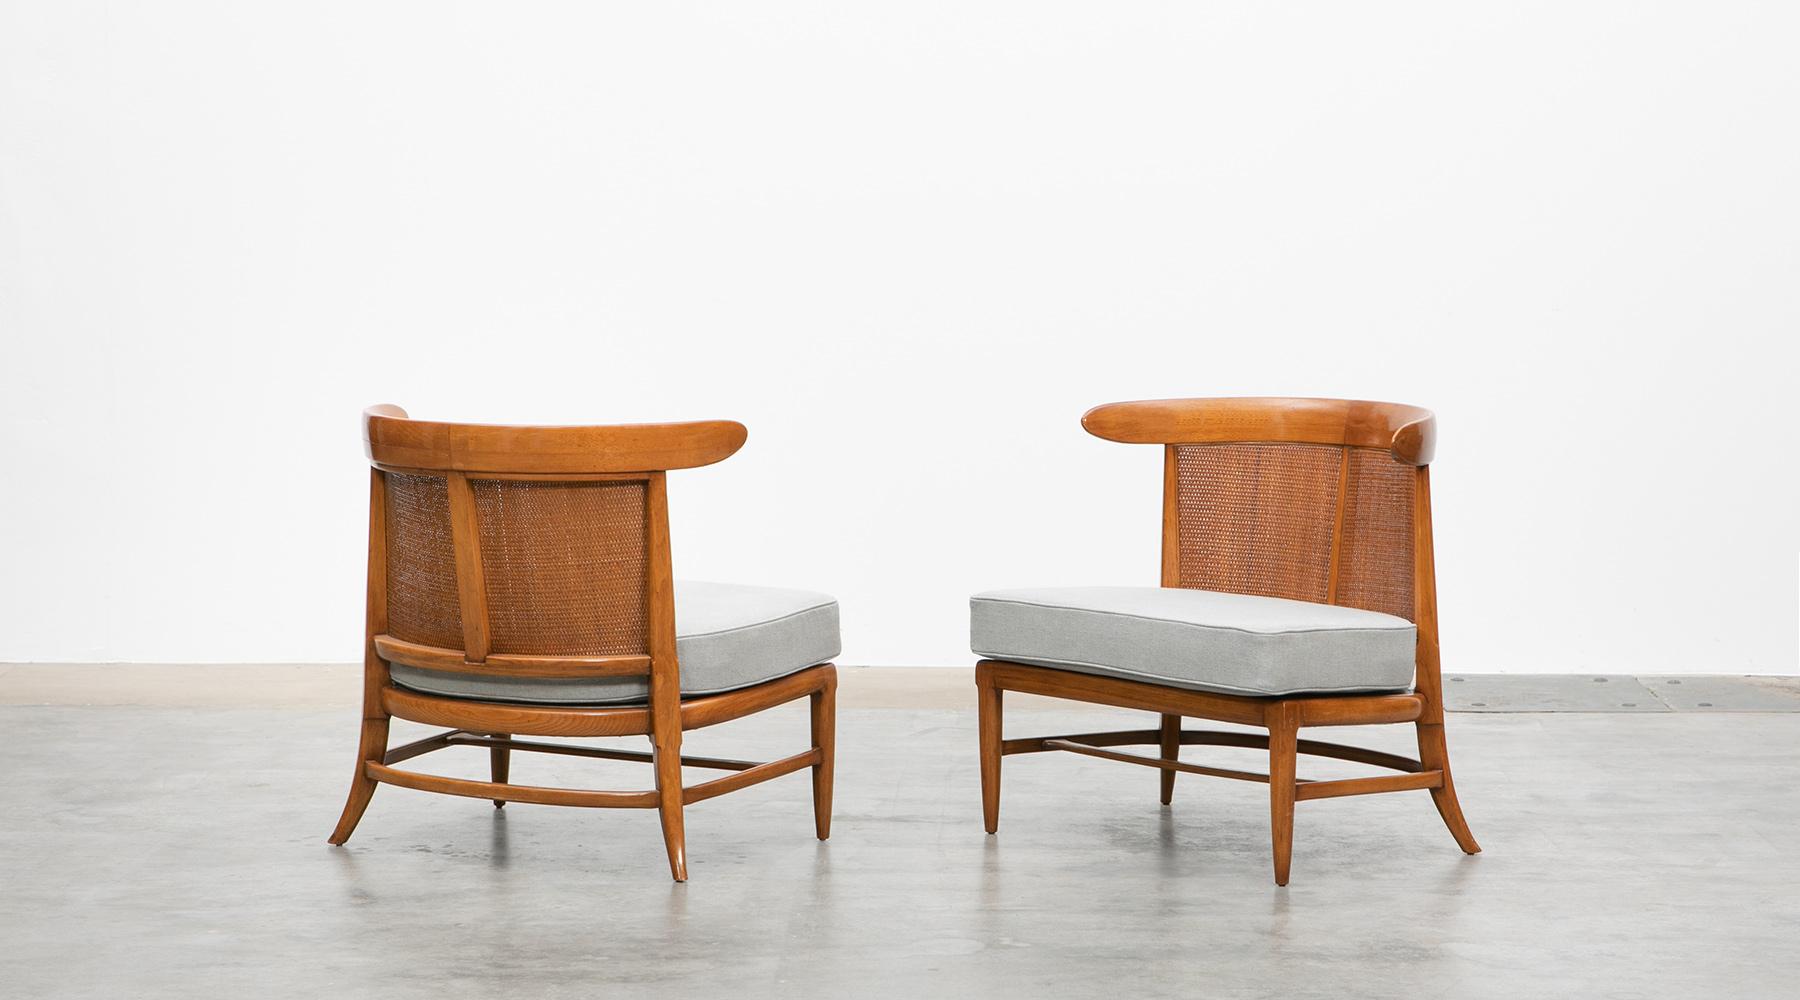 Walnut and cane, lounge chairs, Lubberts & Mulder, 1950s, USA.

Pair of curved caned back lounge chairs designed by John Lubberts and Lambert Mulder in America in circa 1950s. These low slung lounge chairs look great from any angle. They are